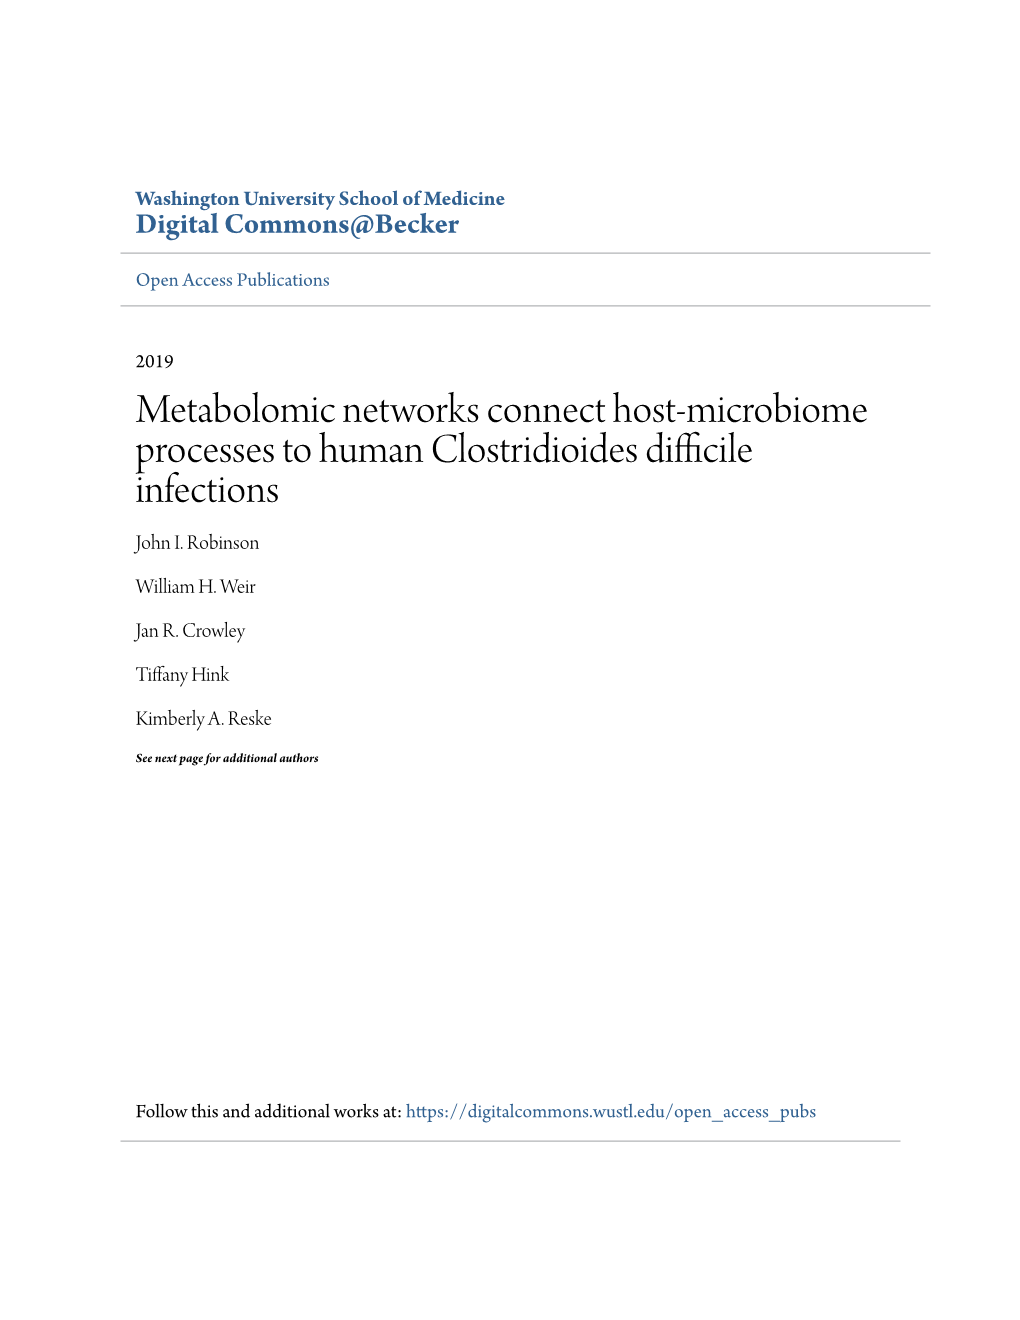 Metabolomic Networks Connect Host-Microbiome Processes to Human Clostridioides Difficile Infections John I